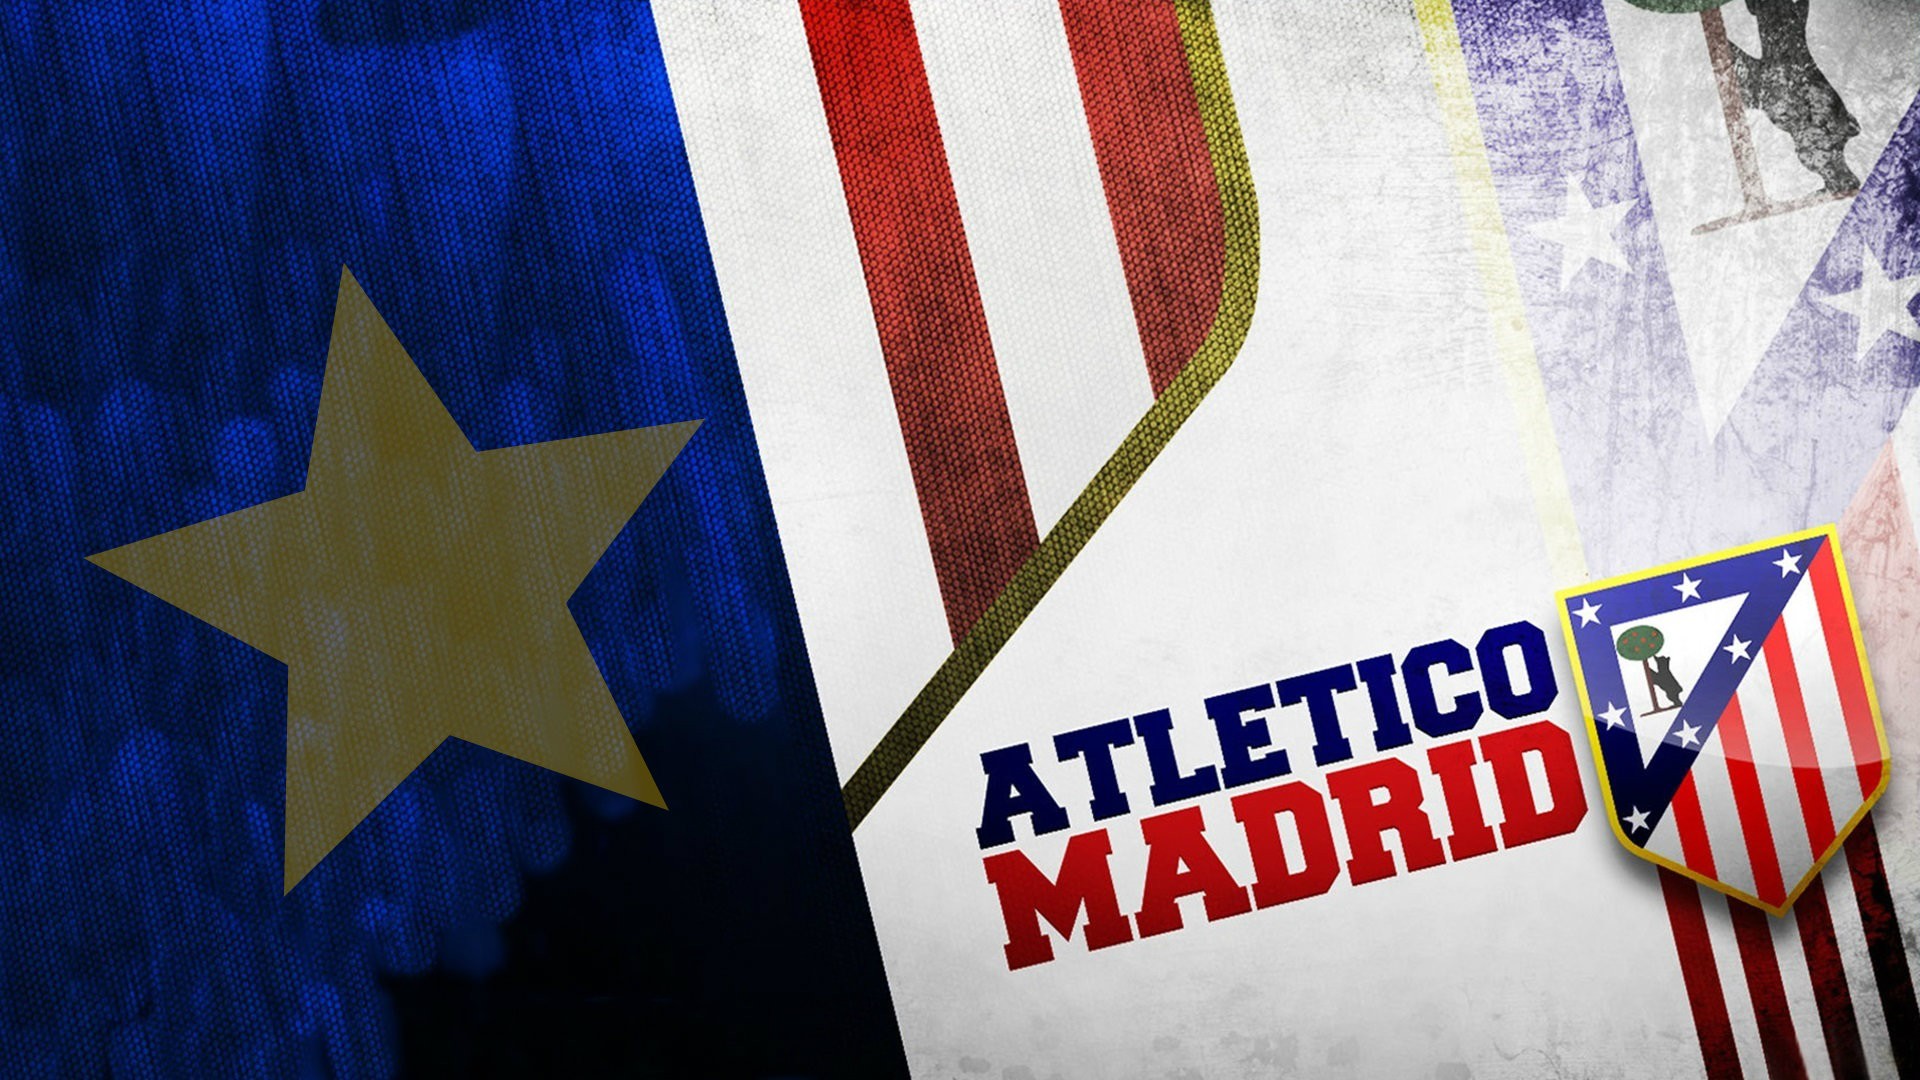 Atletico Madrid, Sports, Soccer Clubs, Soccer, Spain Wallpaper